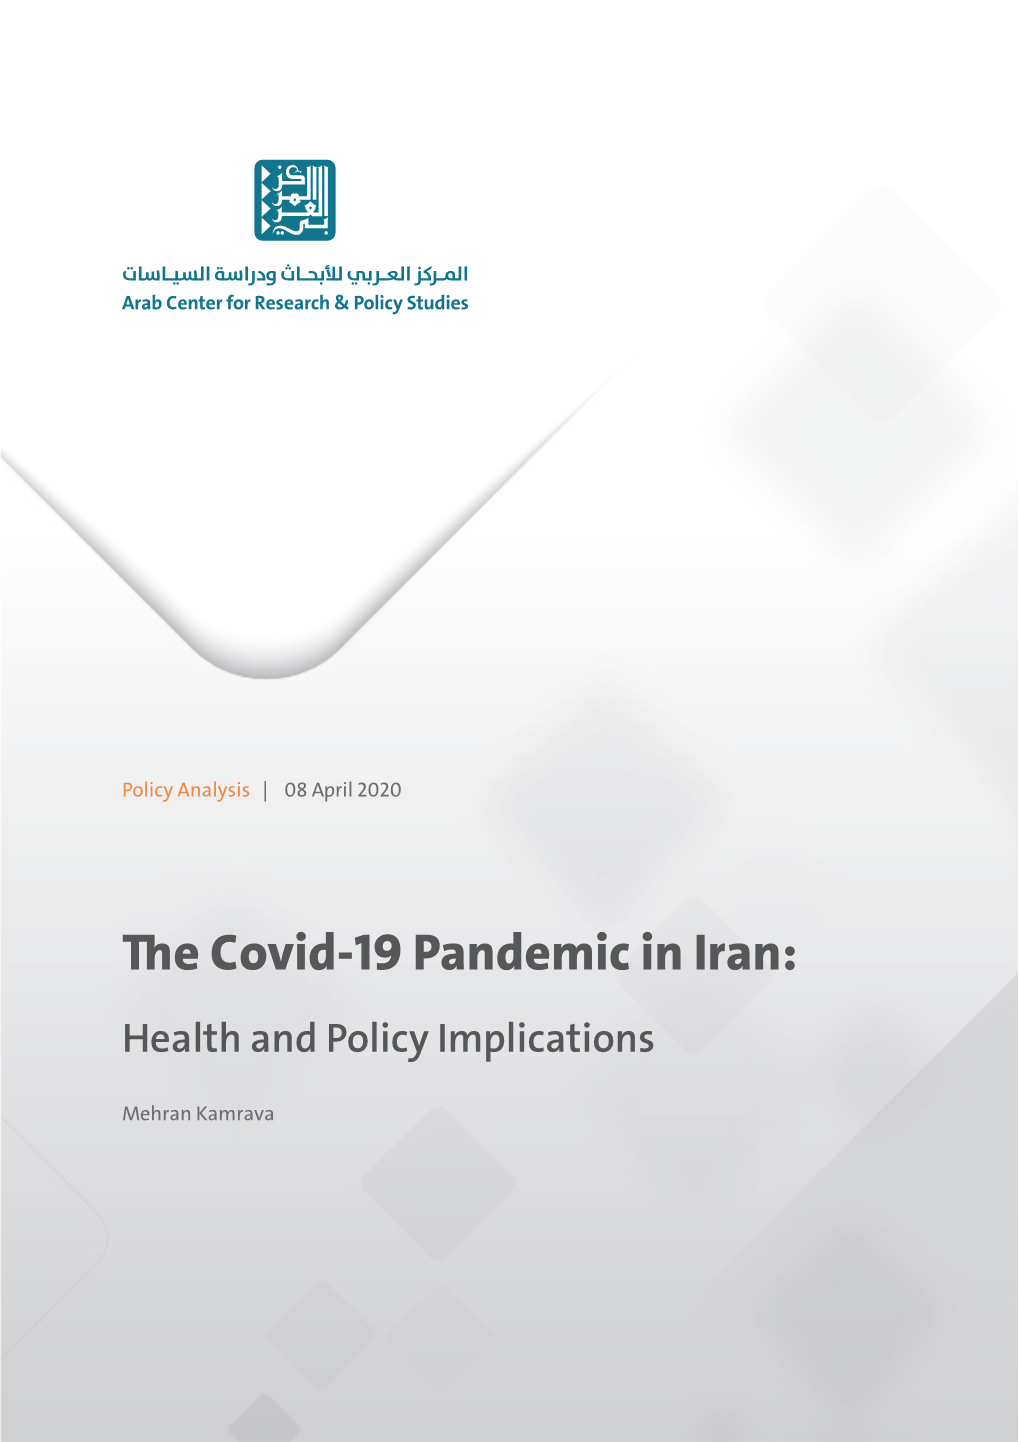 The Covid-19 Pandemic in Iran: Health and Policy Implications